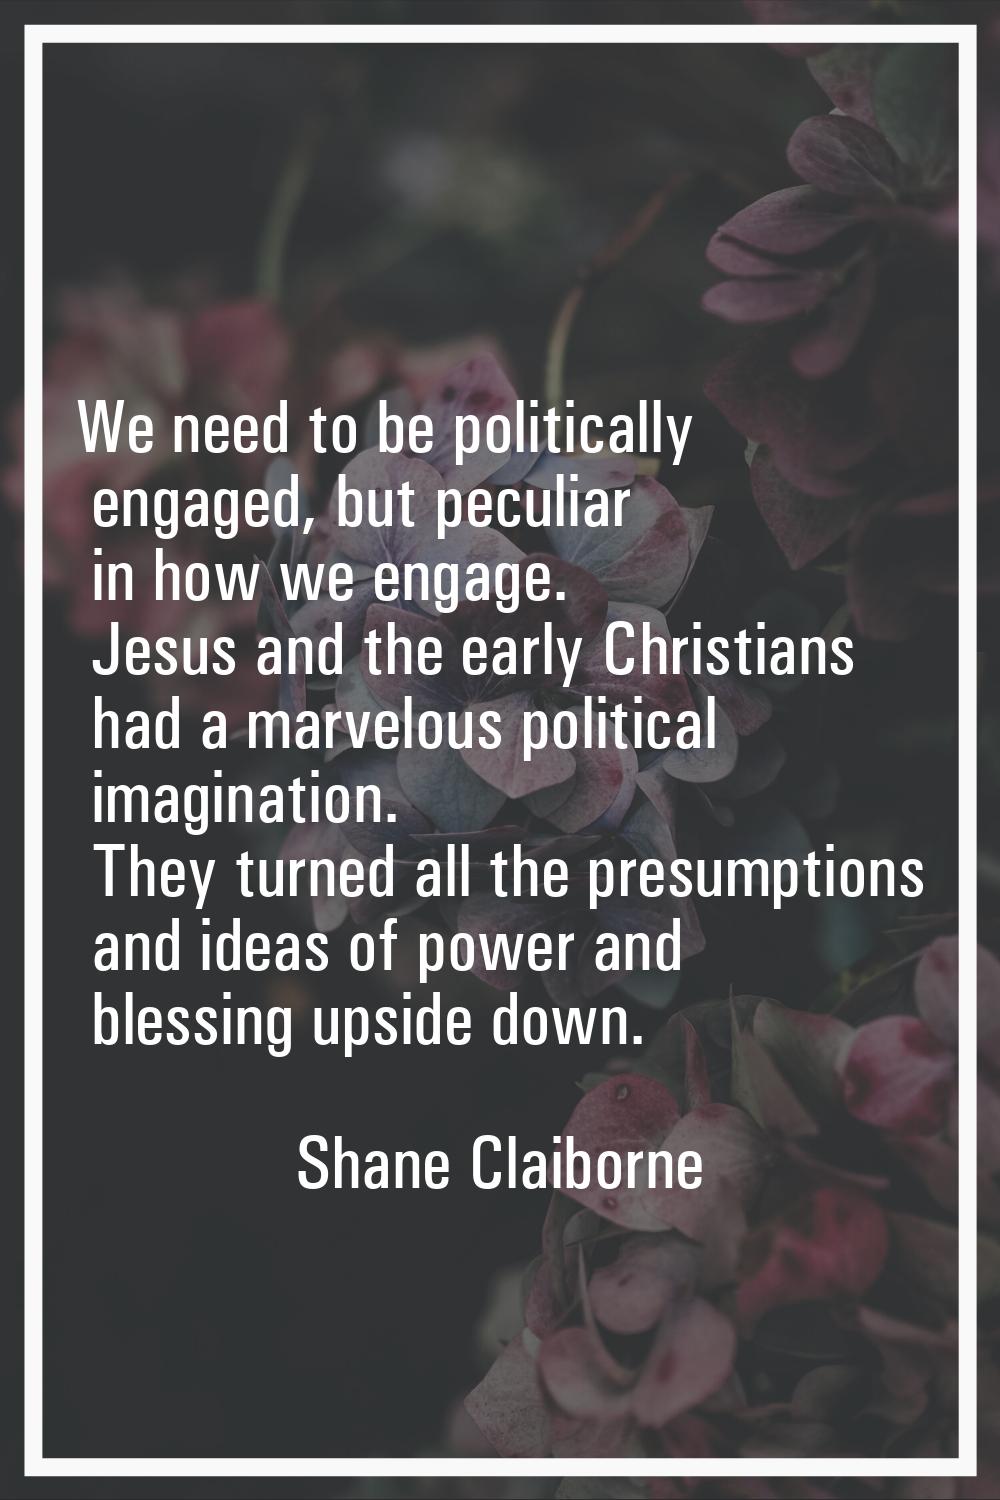 We need to be politically engaged, but peculiar in how we engage. Jesus and the early Christians ha